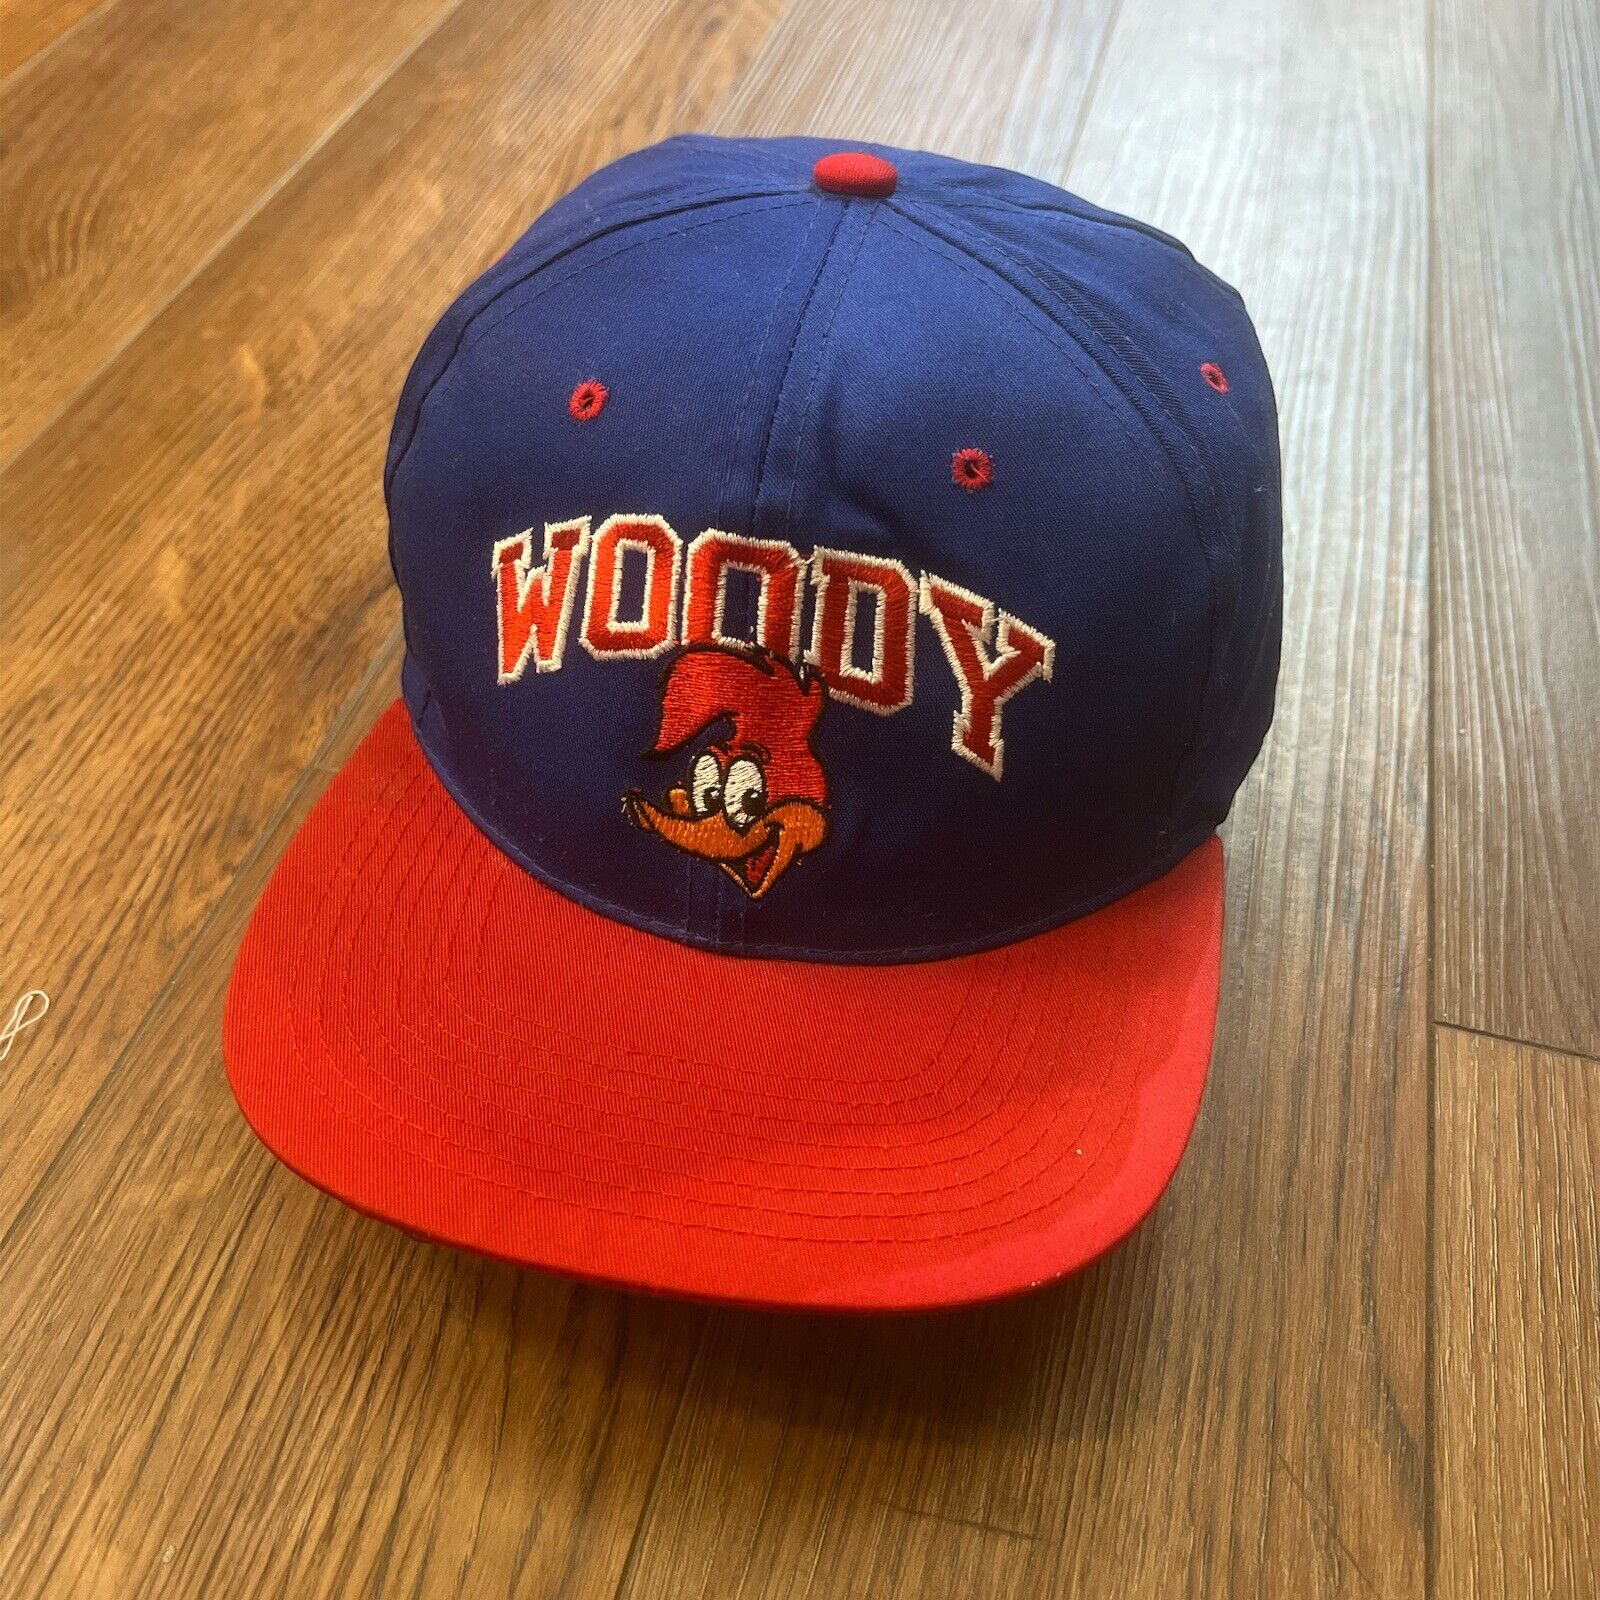 Woody Woodpecker Hat Cap,1993 Walter Lantz,Red & Blue,Embroidered,Nice Preowned